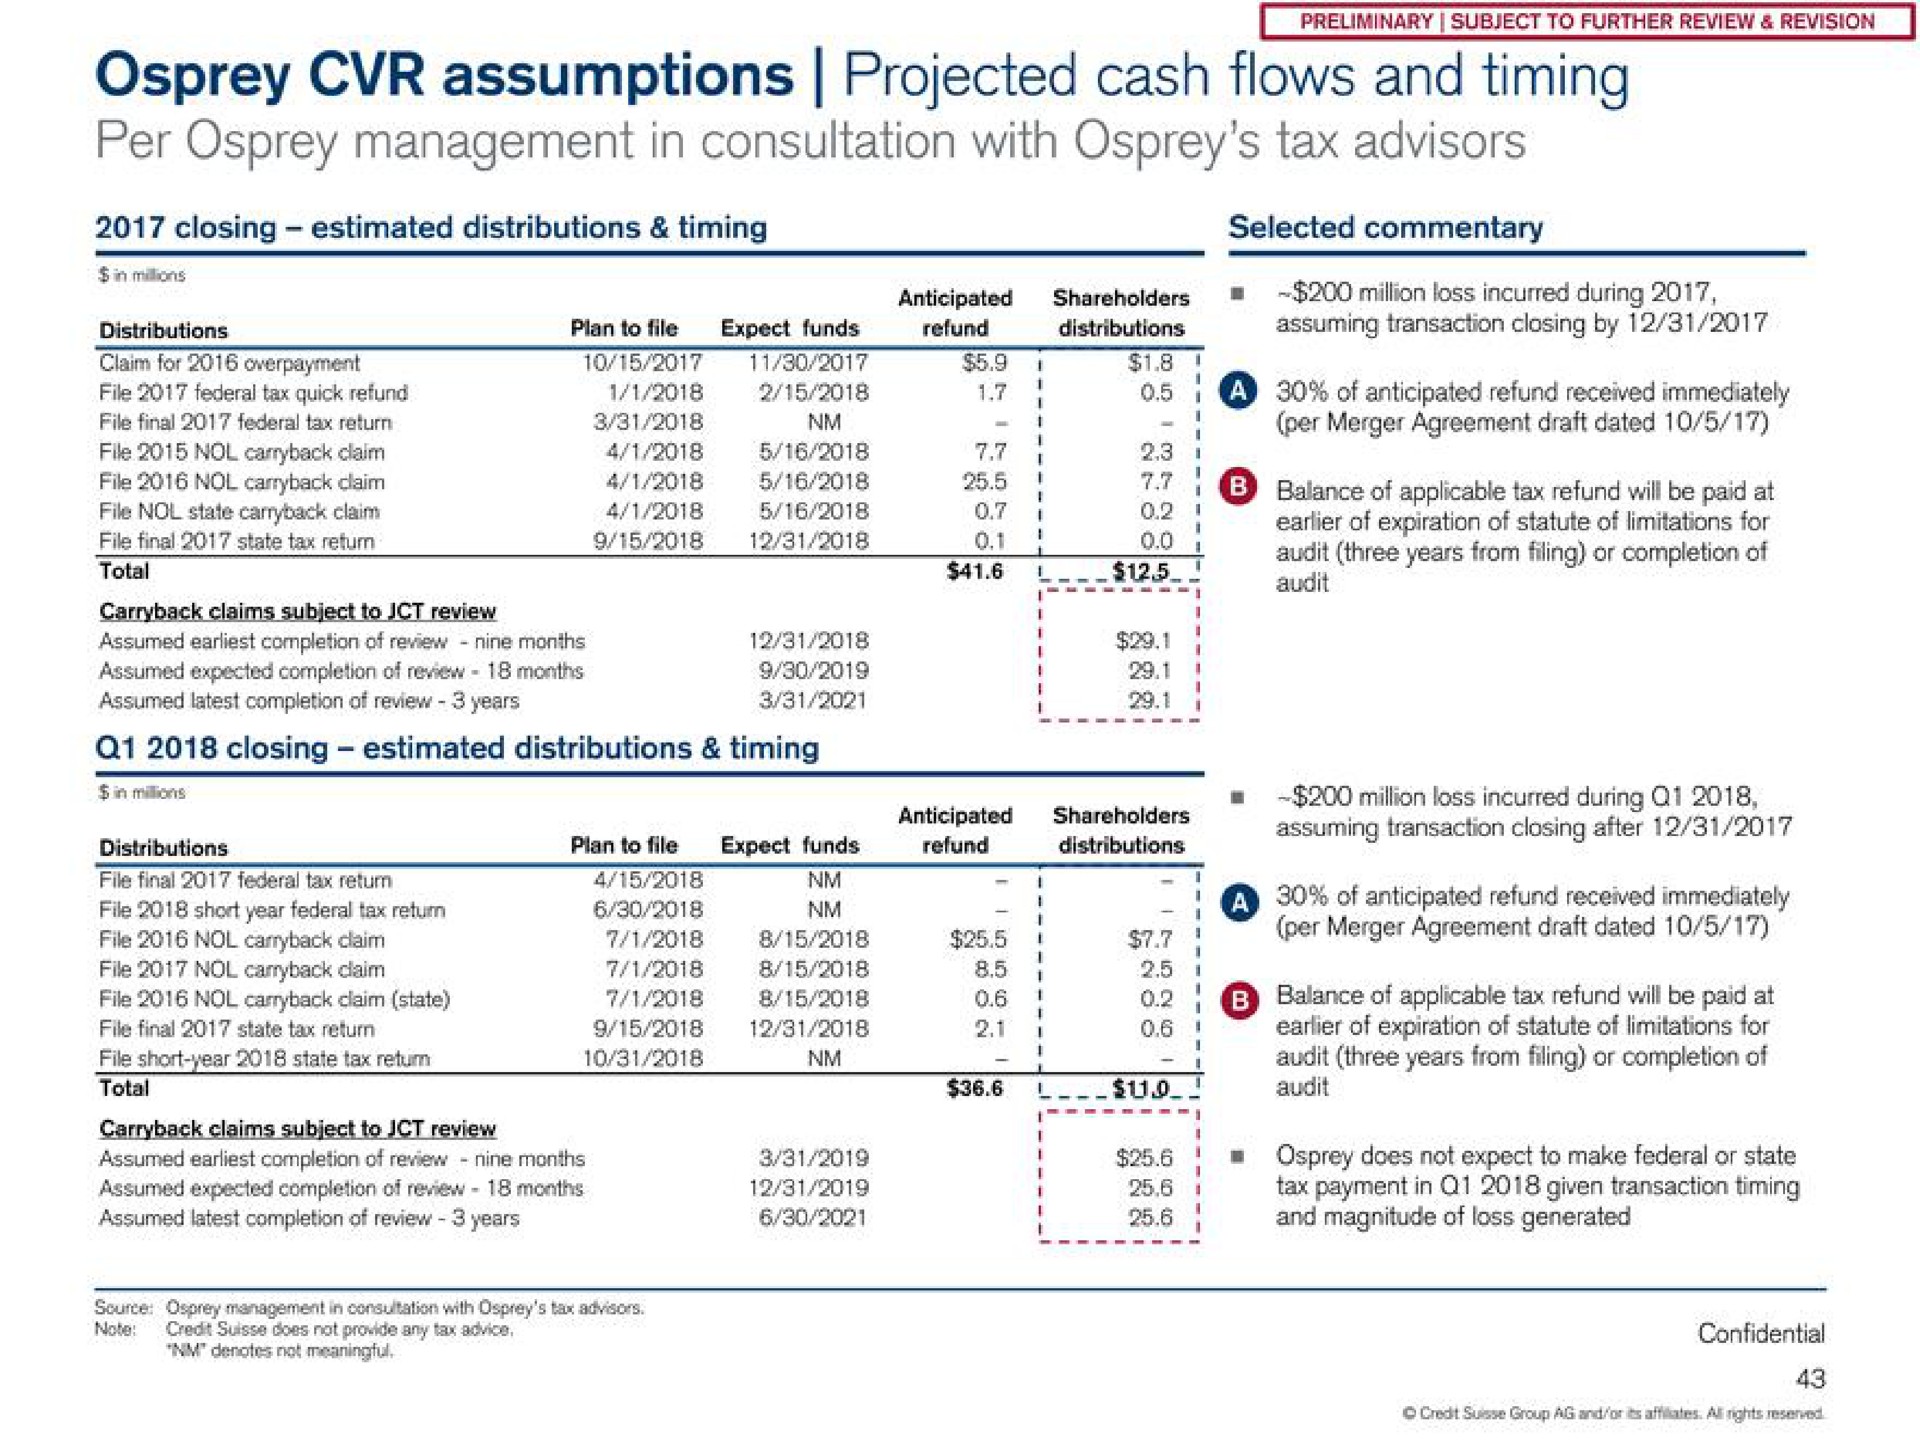 osprey assumptions projected cash flows and timing per osprey management in consultation with osprey tax advisors distributions plan expect funds refund transaction assuming closing distributions closing after | Credit Suisse